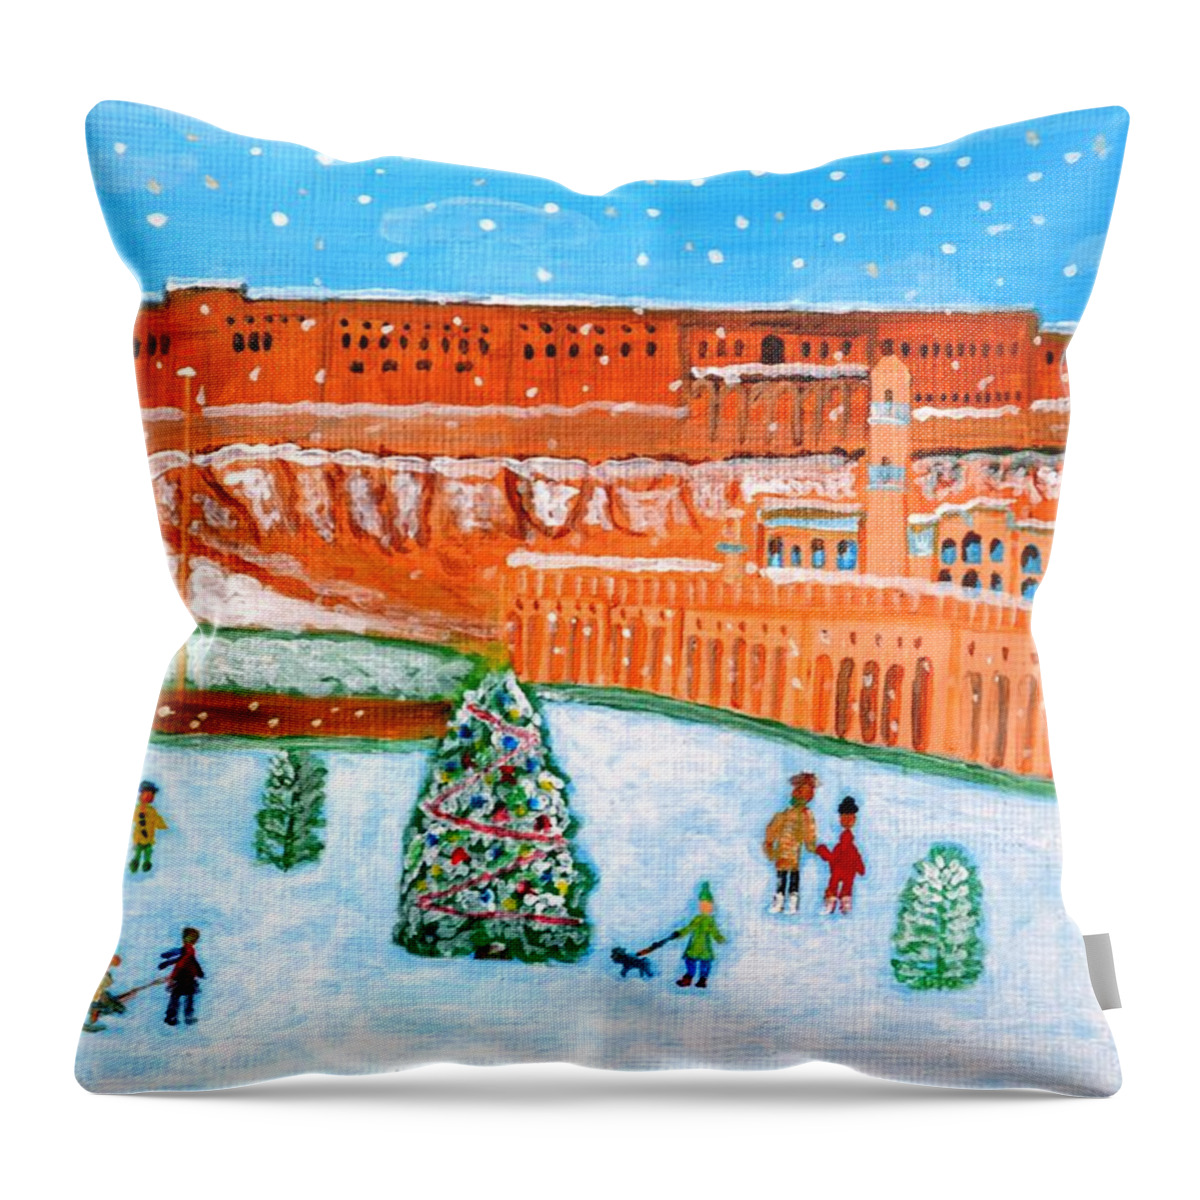 Erbil Throw Pillow featuring the painting Erbil Citadel Christmas by Magdalena Frohnsdorff